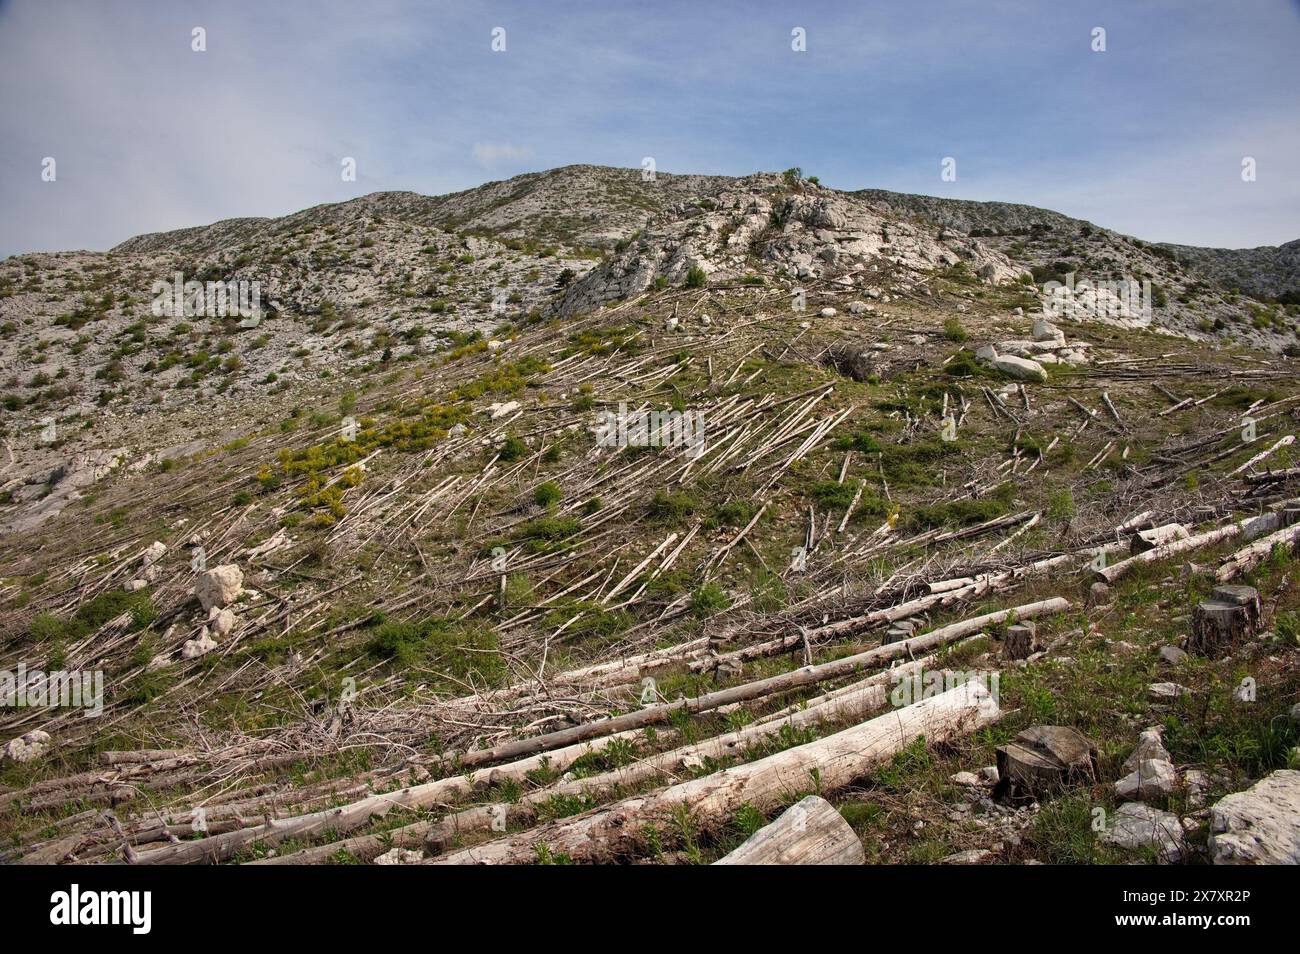 Mediterranean mountain landscape with downed trees Stock Photo